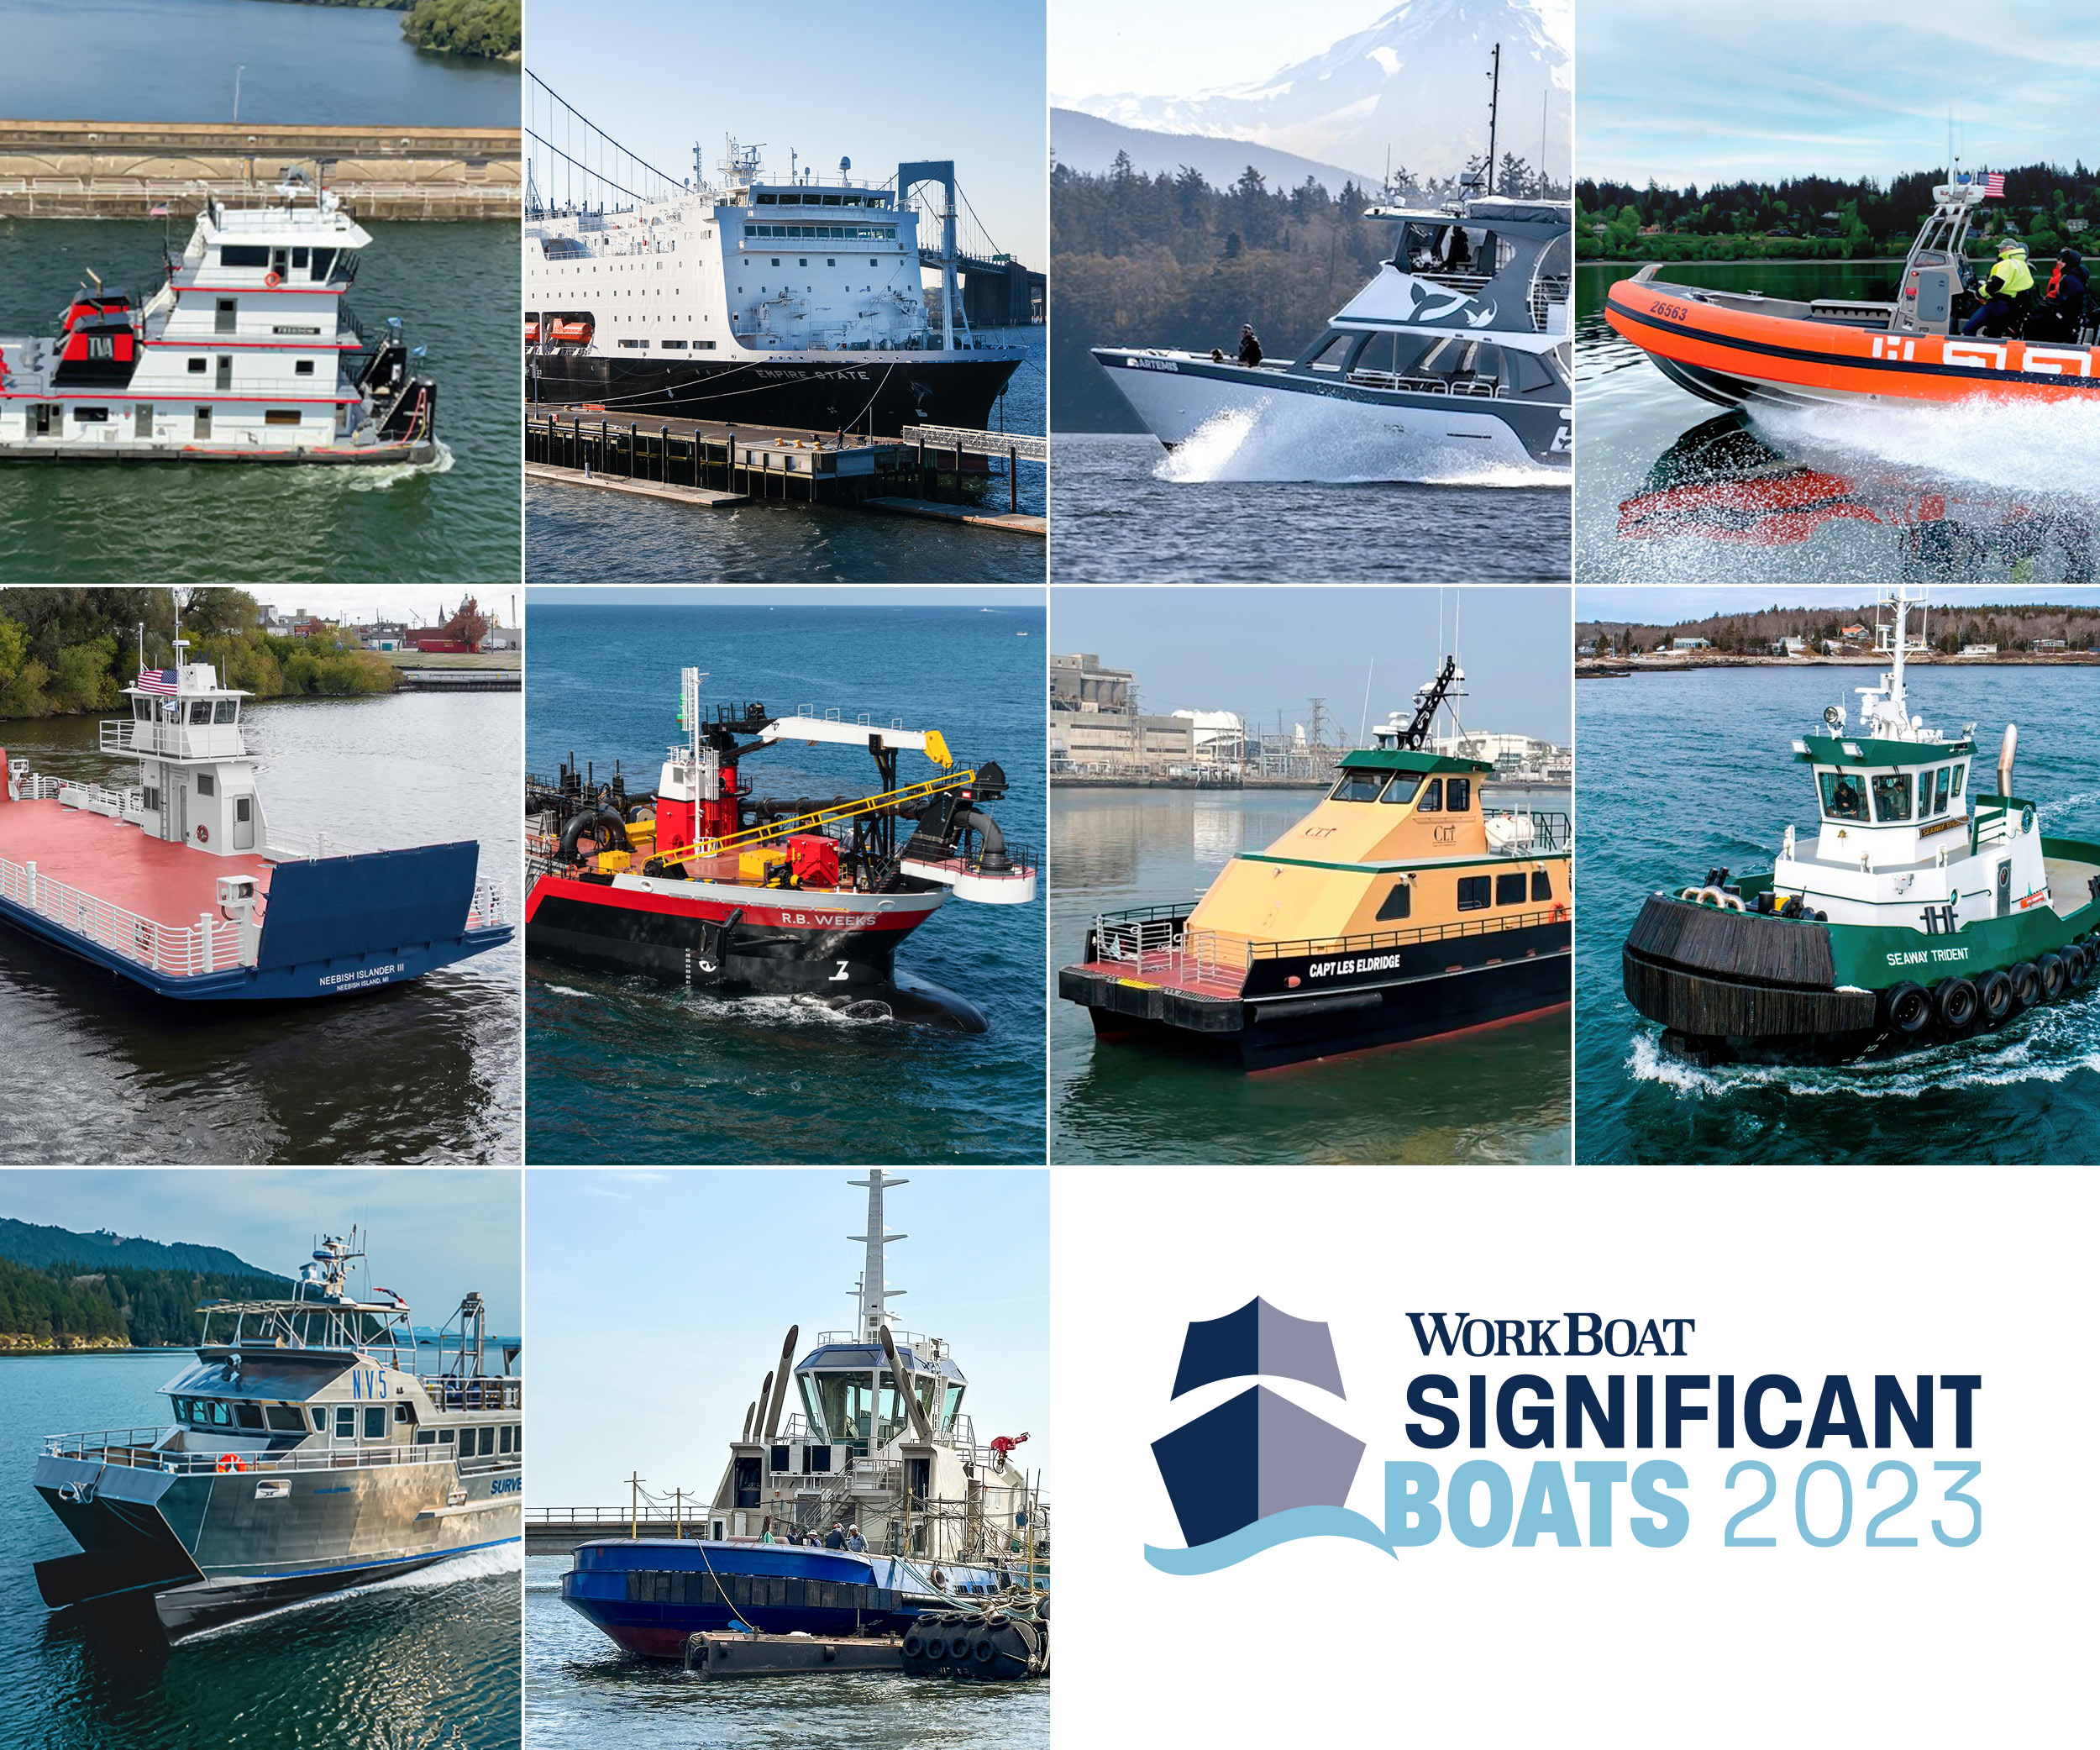 WorkBoat names its 10 Significant Boats of 2023